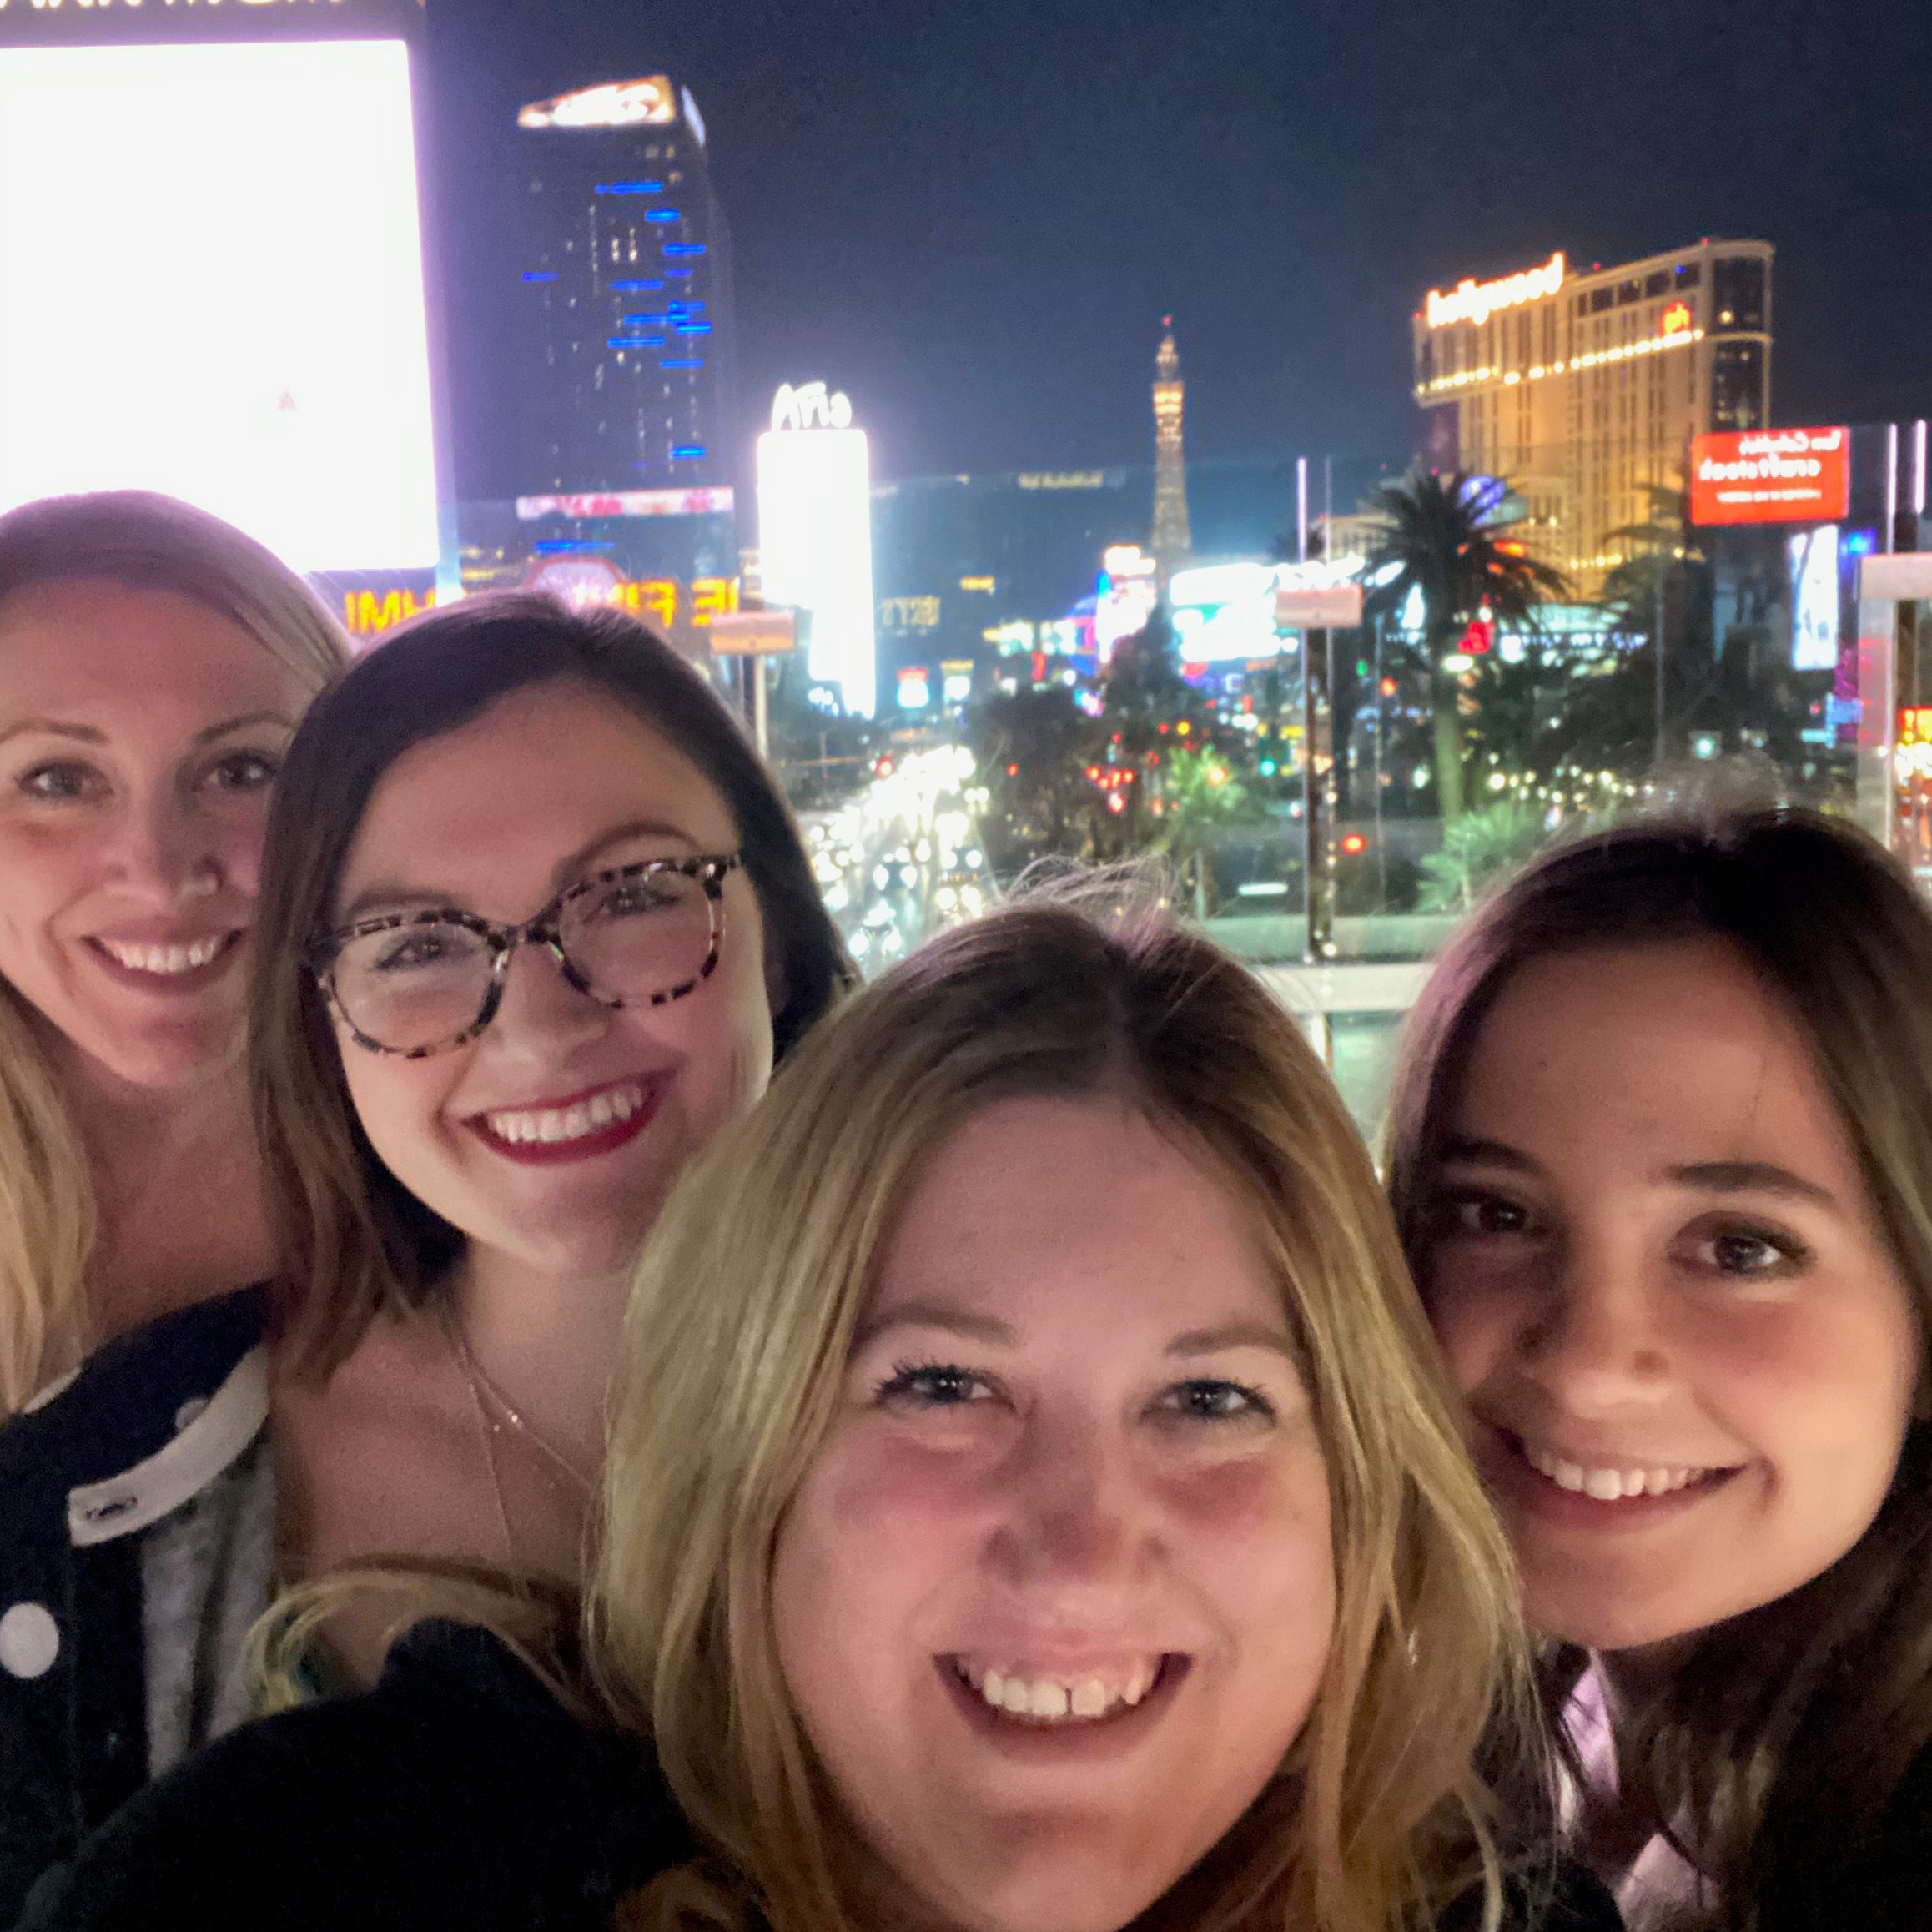 Viva Las Vegas -- Where We Stayed, Packing Lessons Learned, and More!